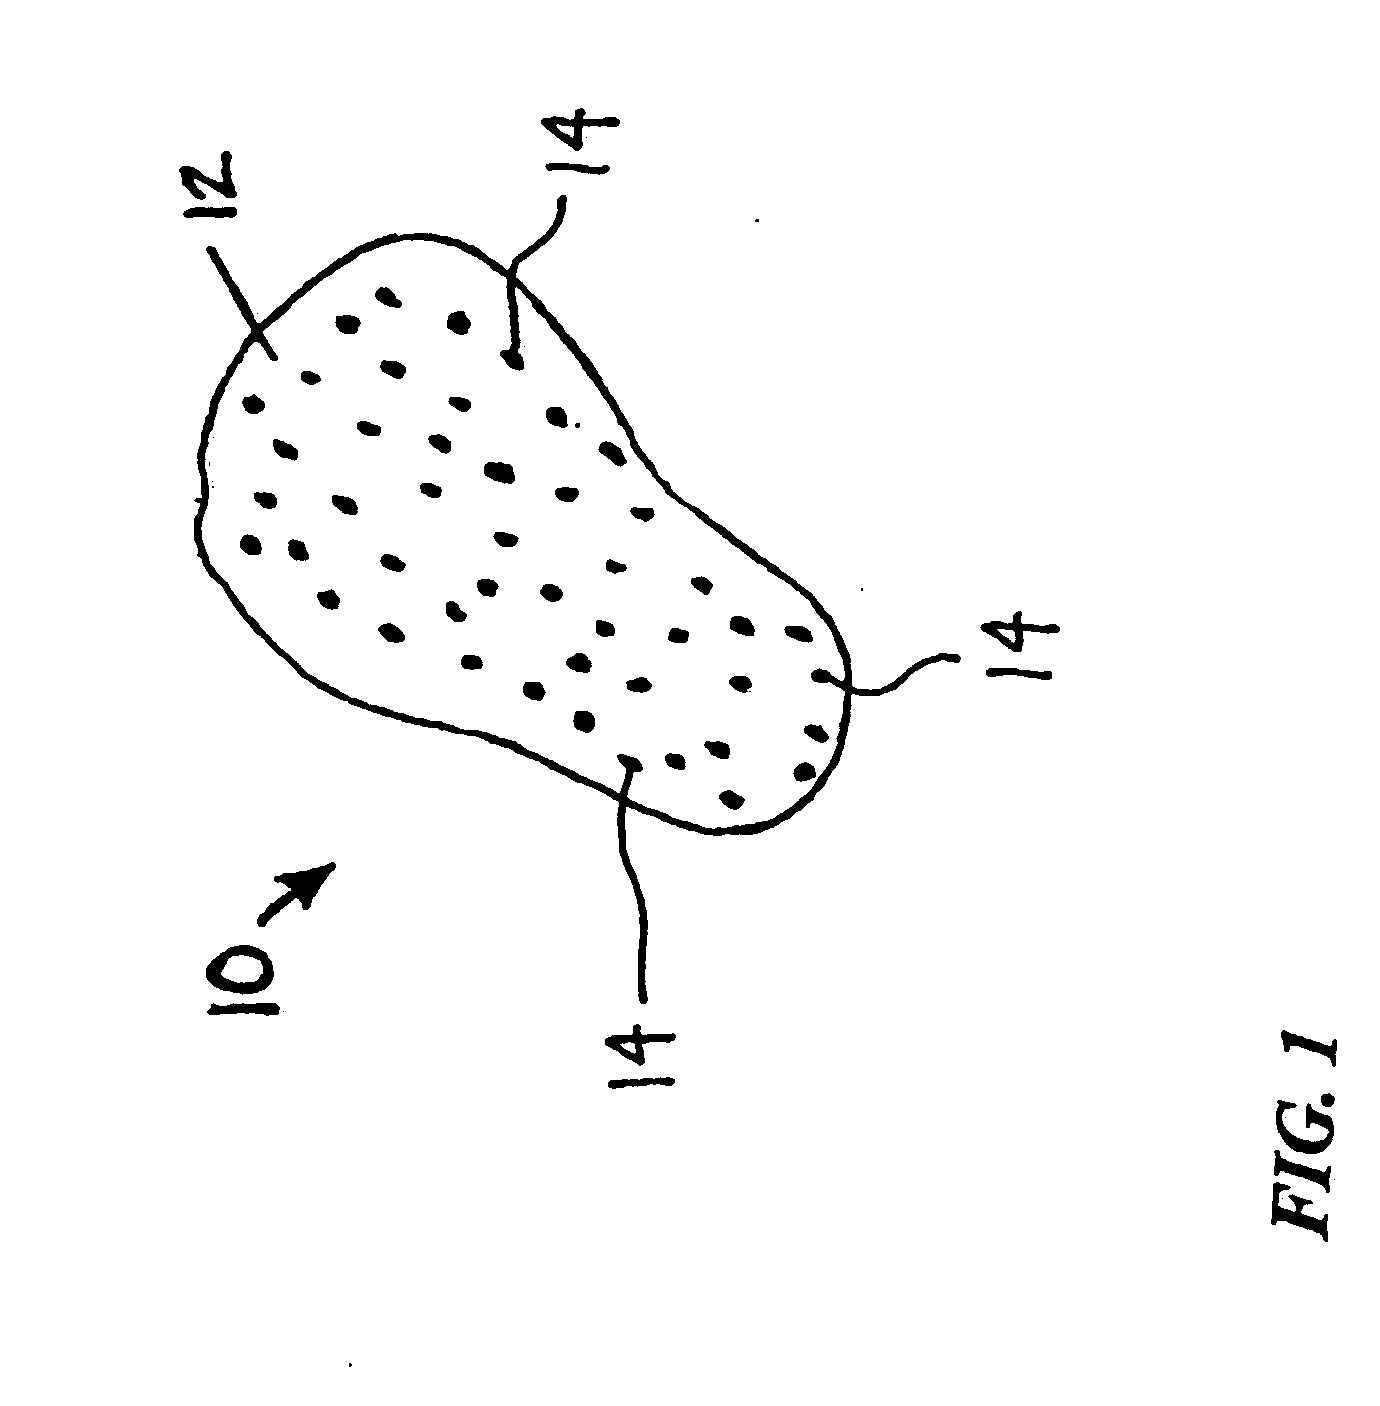 Thermopolymer composition and related methods